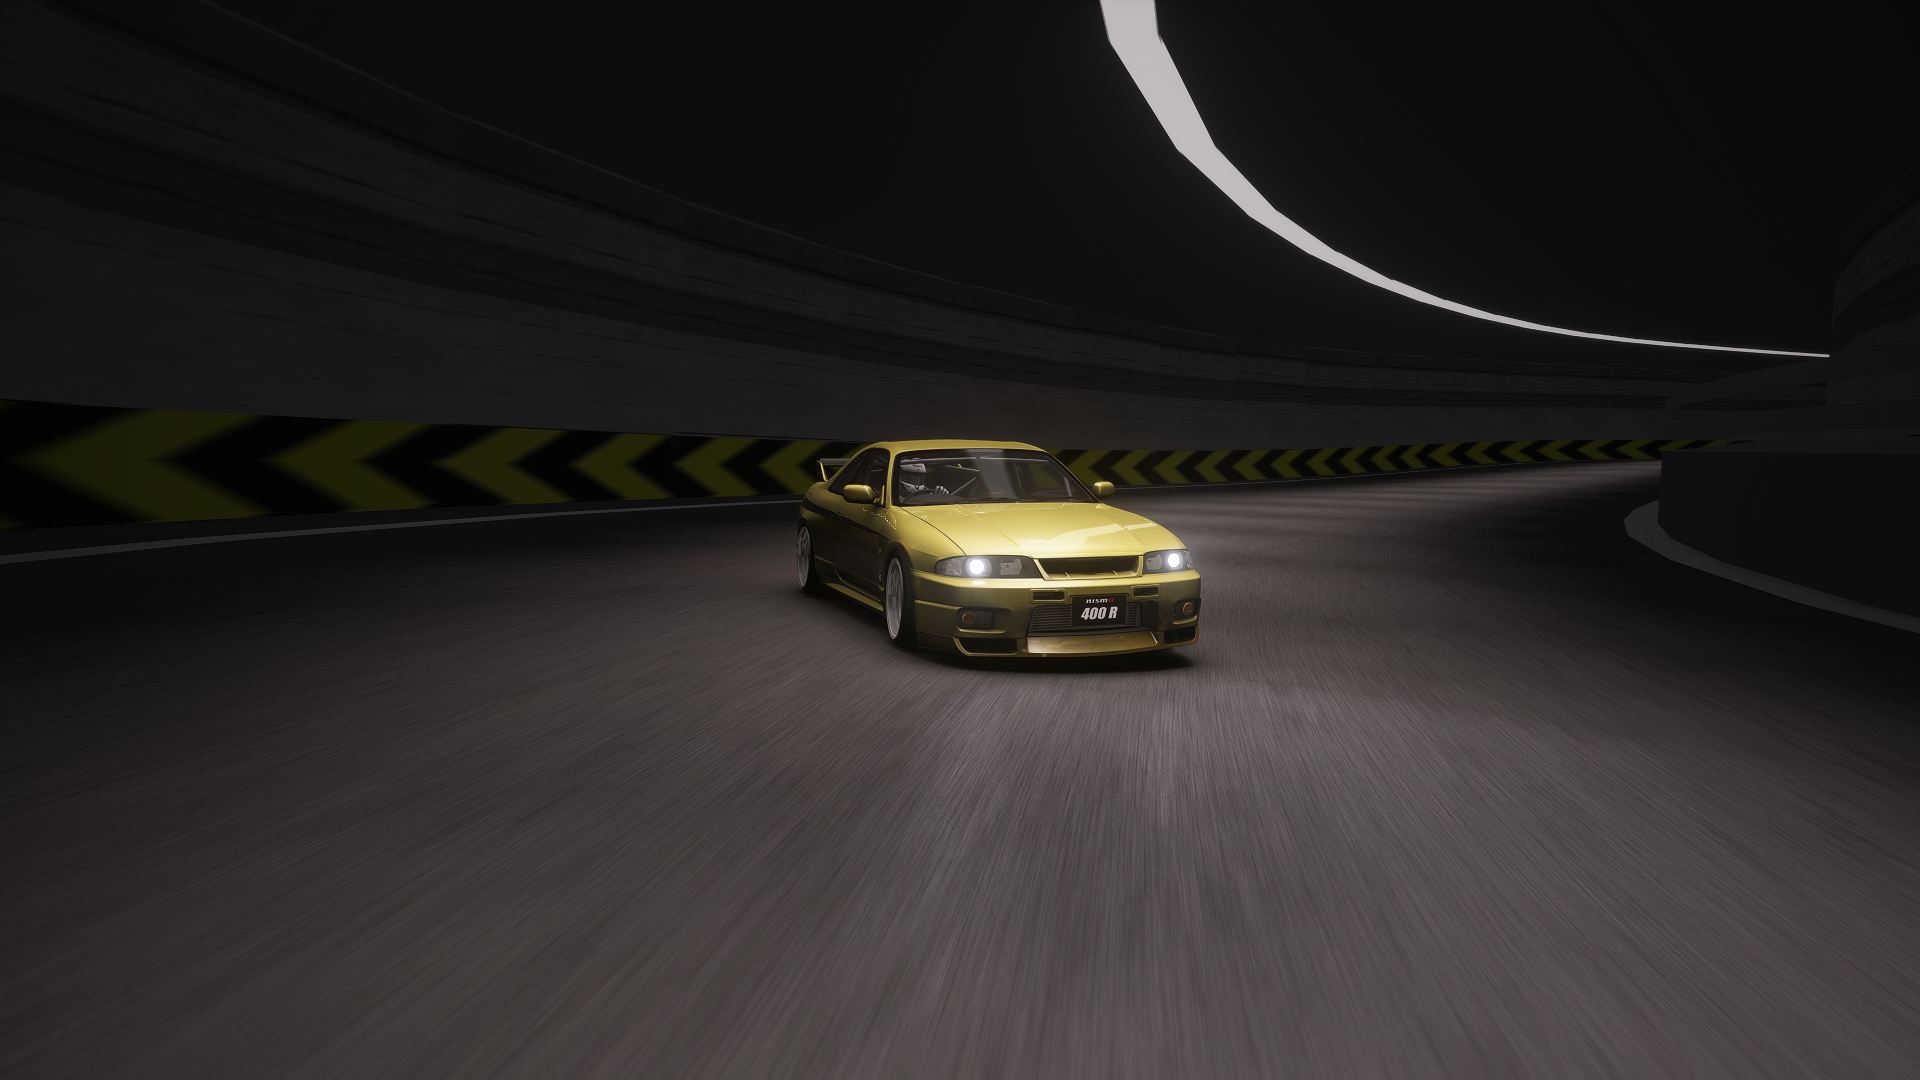 Screenshot_sts_r33_gtr_s3_n1_tuned_400r_special_stage_route_5_3-6-121-1-53-0.jpg